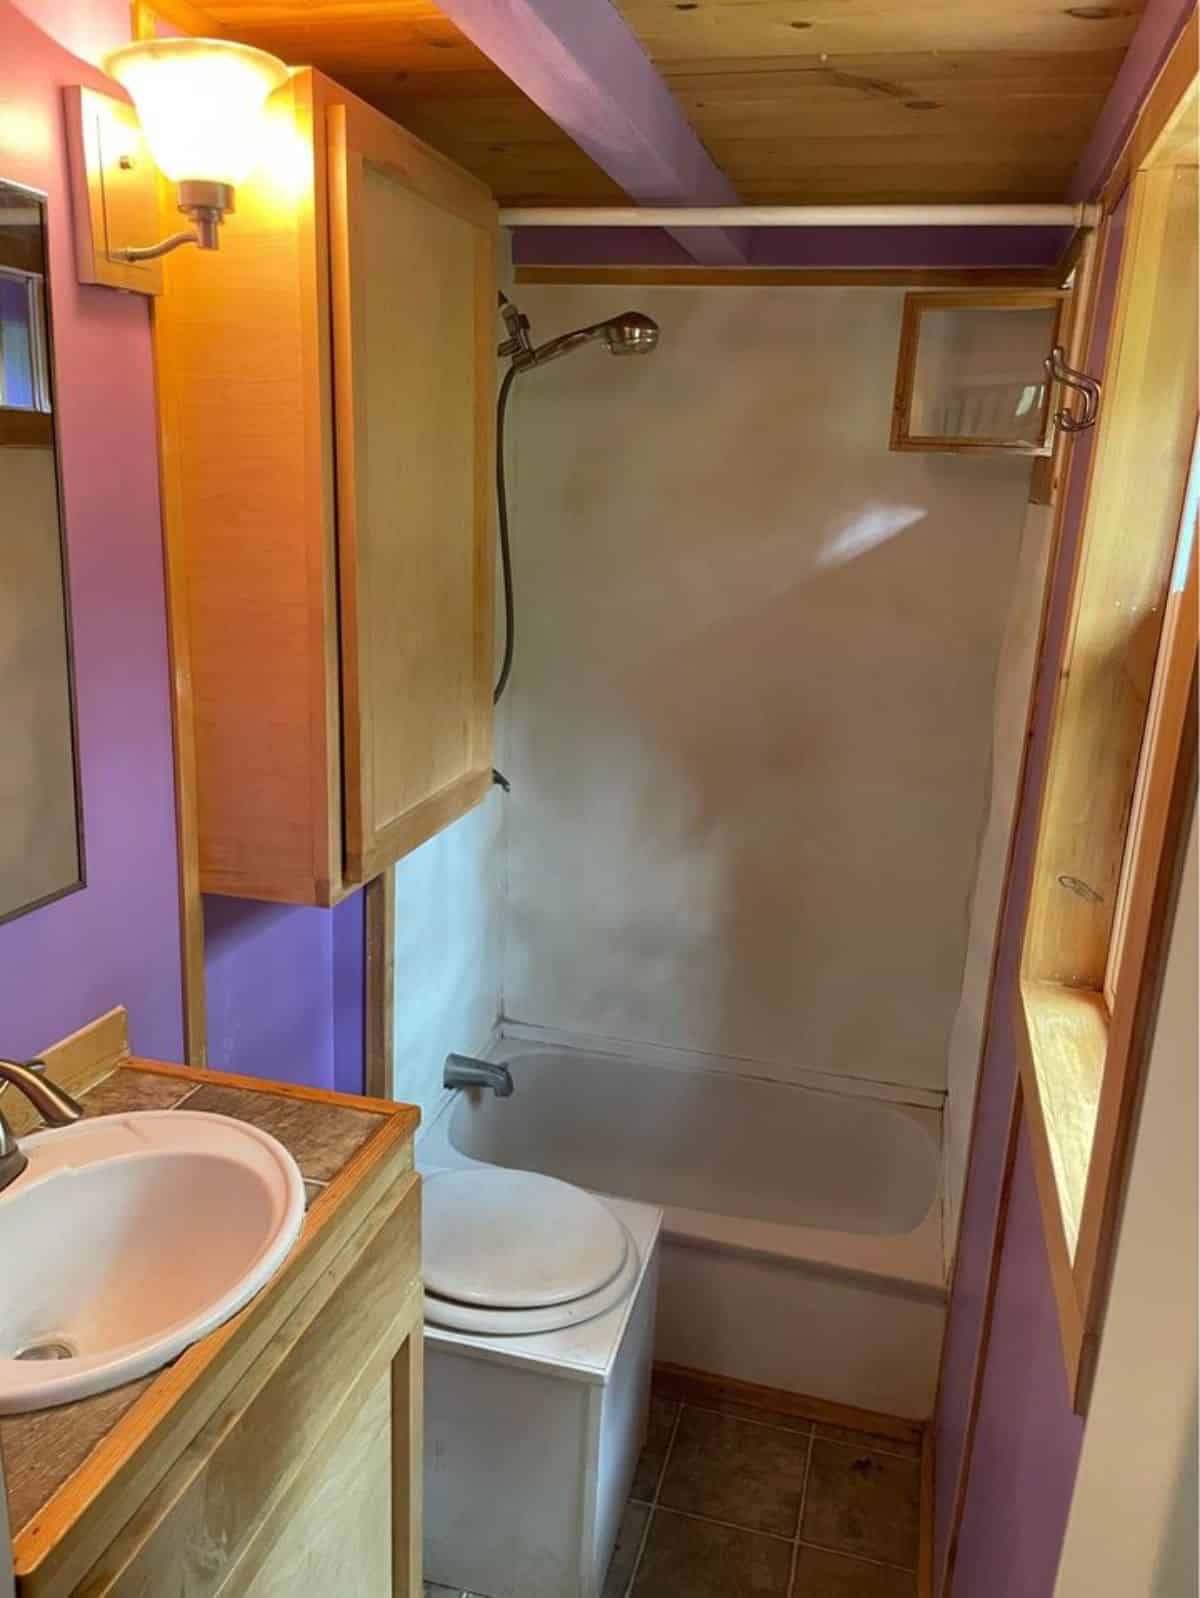 Bathtub in bathroom of 27’ Tiny House With Two Lofts